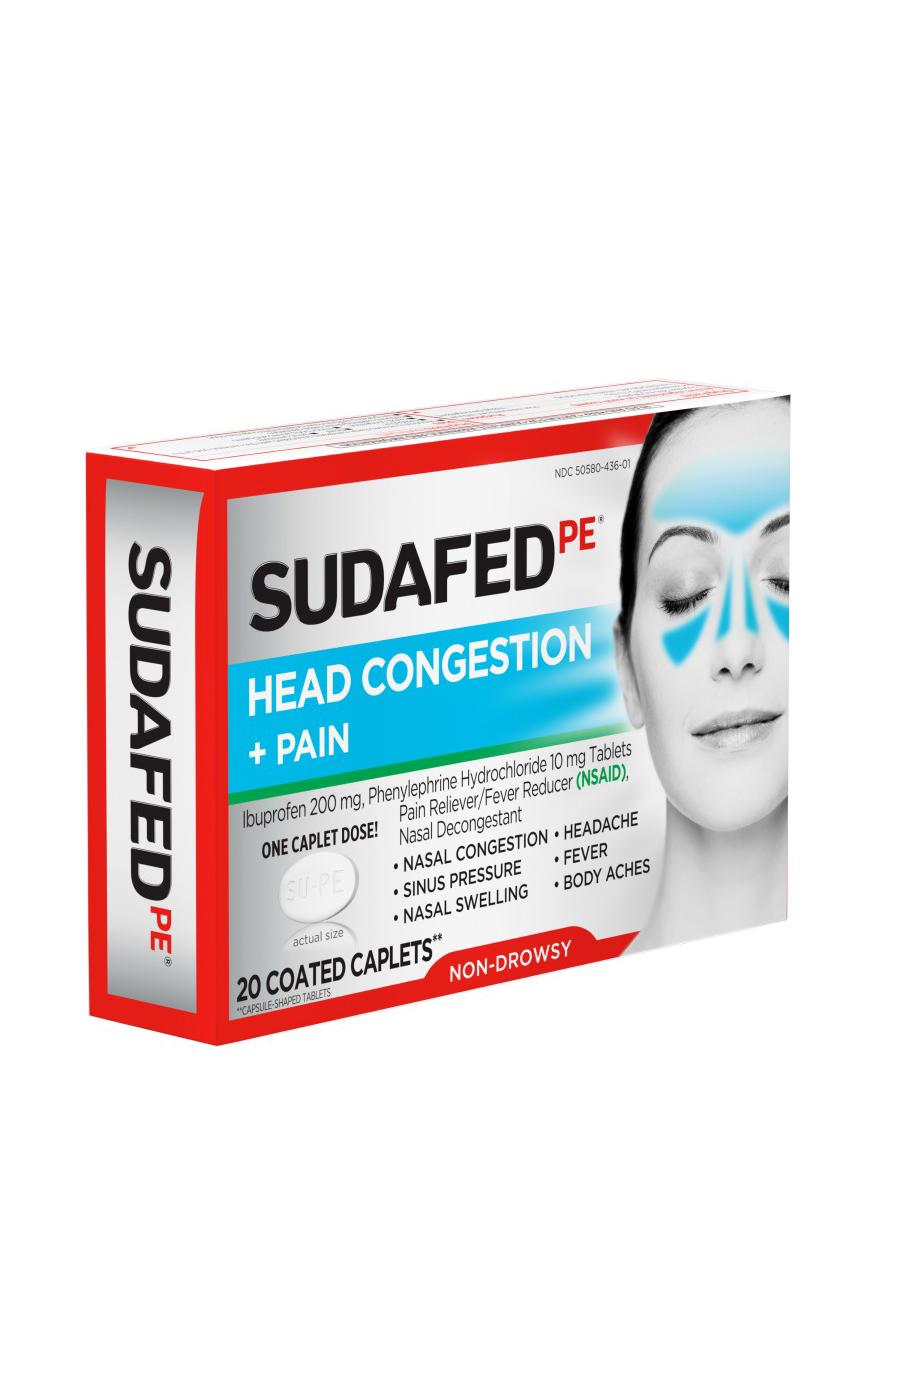 Sudafed PE Head Congestion + Pain Coated Tablets; image 5 of 6